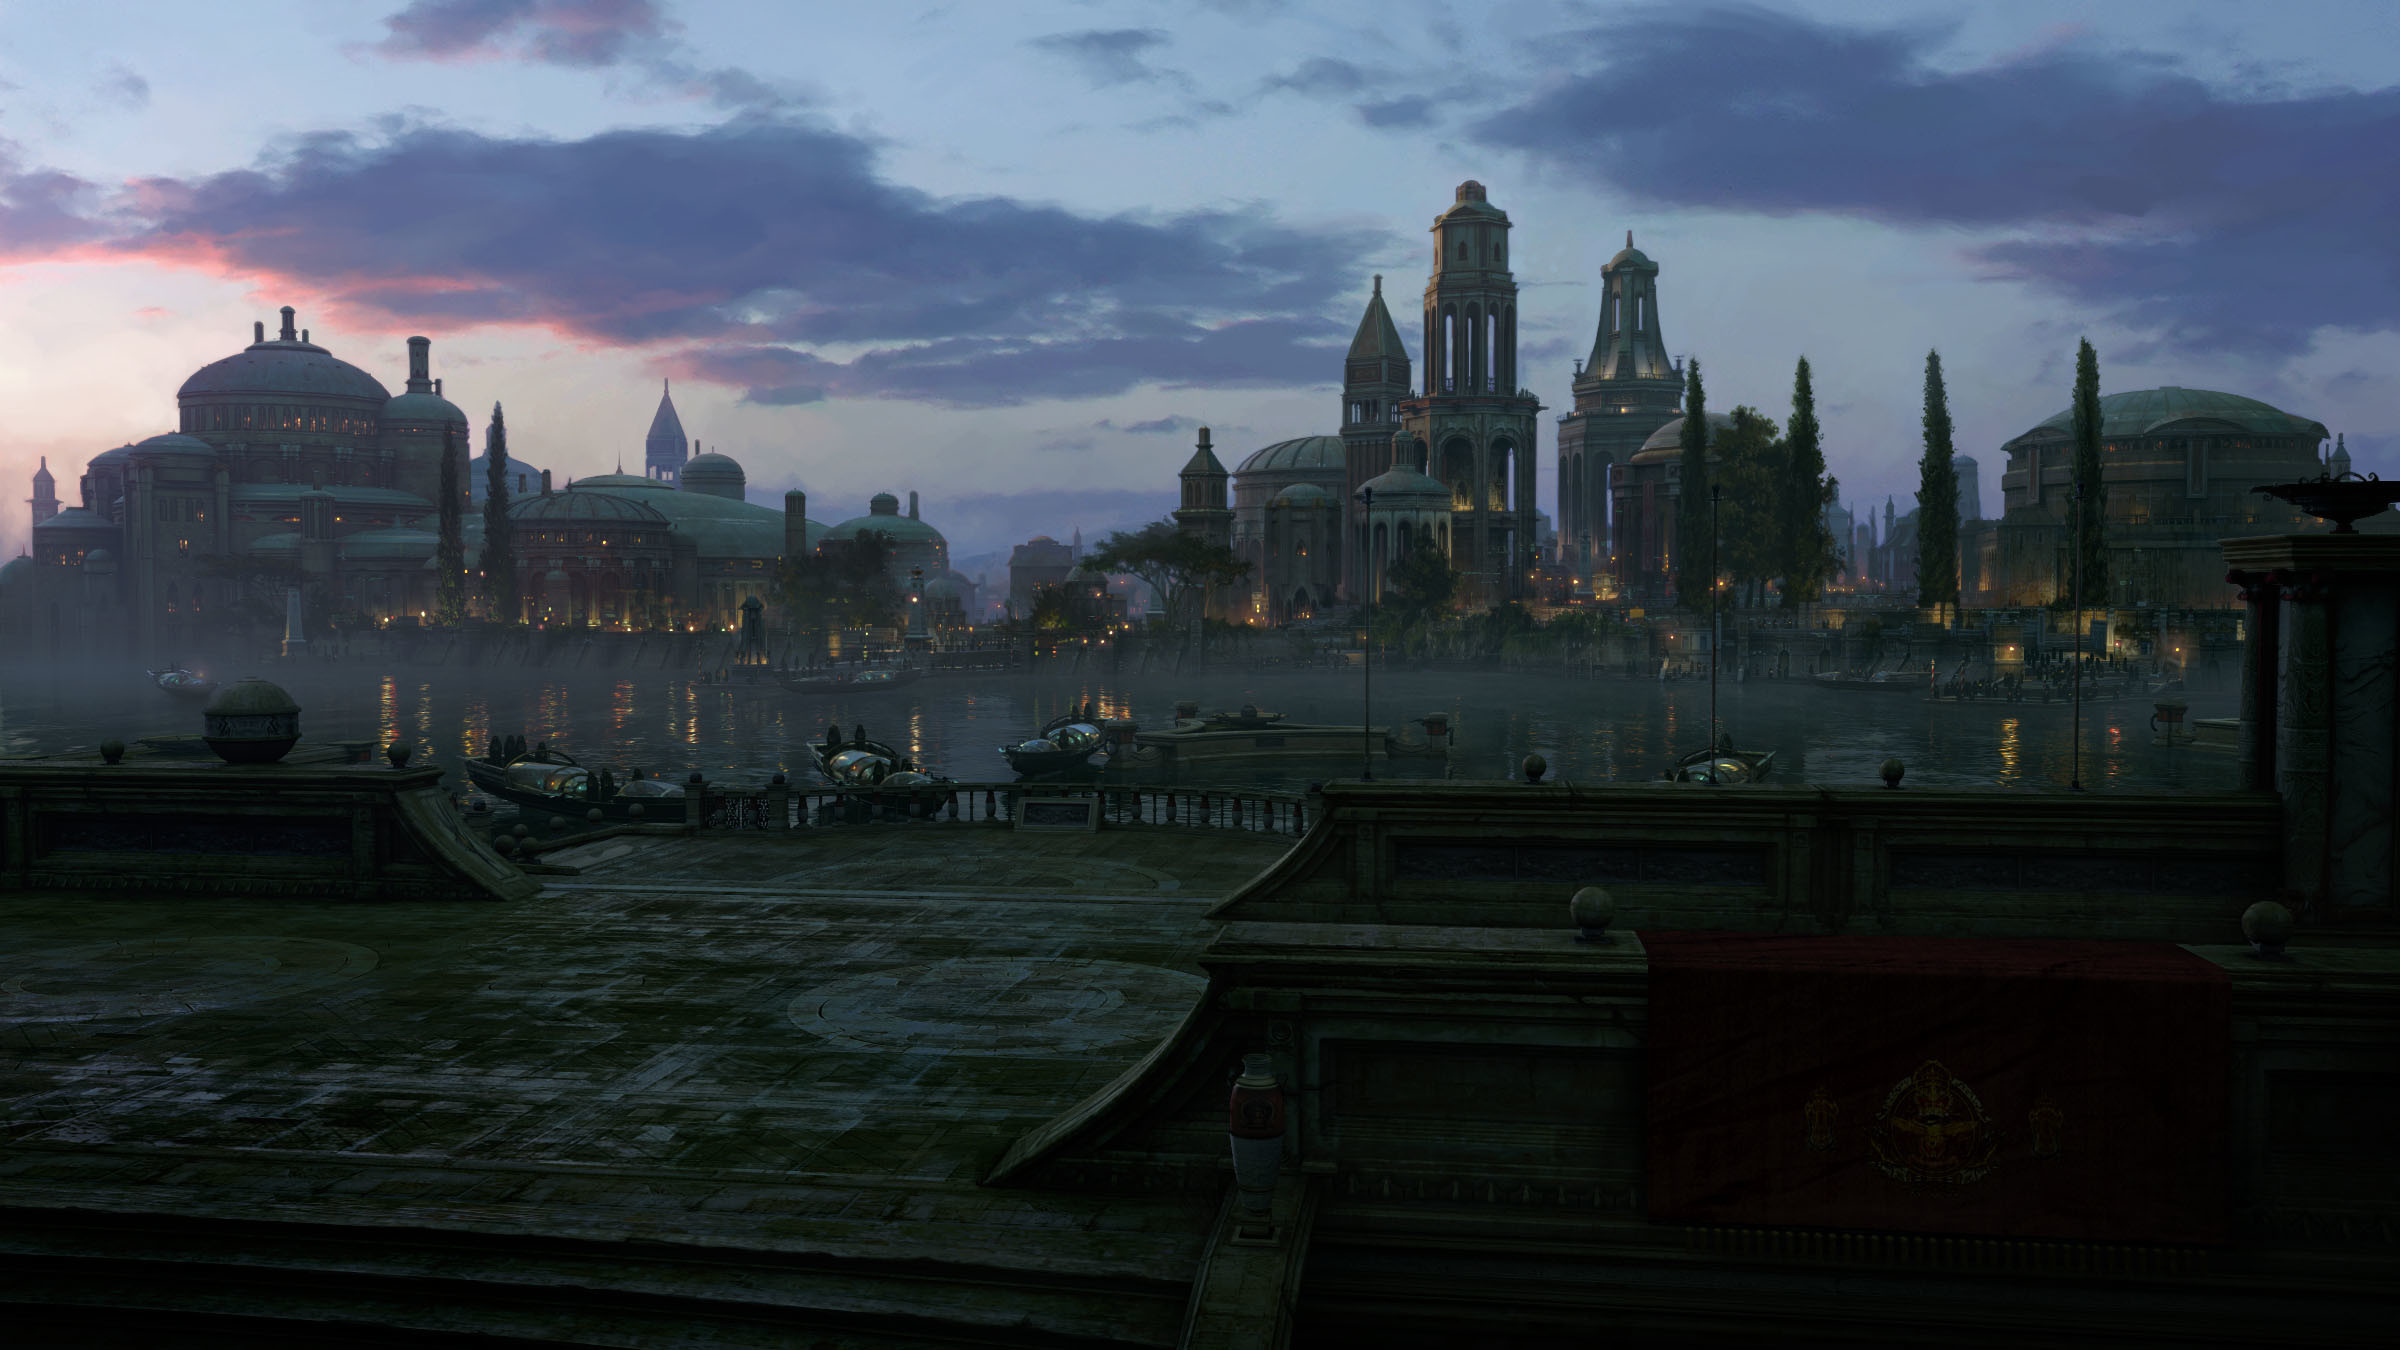 2400x1350 Star Wars images Landscape HD: Naboo (2400/1350) HD wallpaper and .